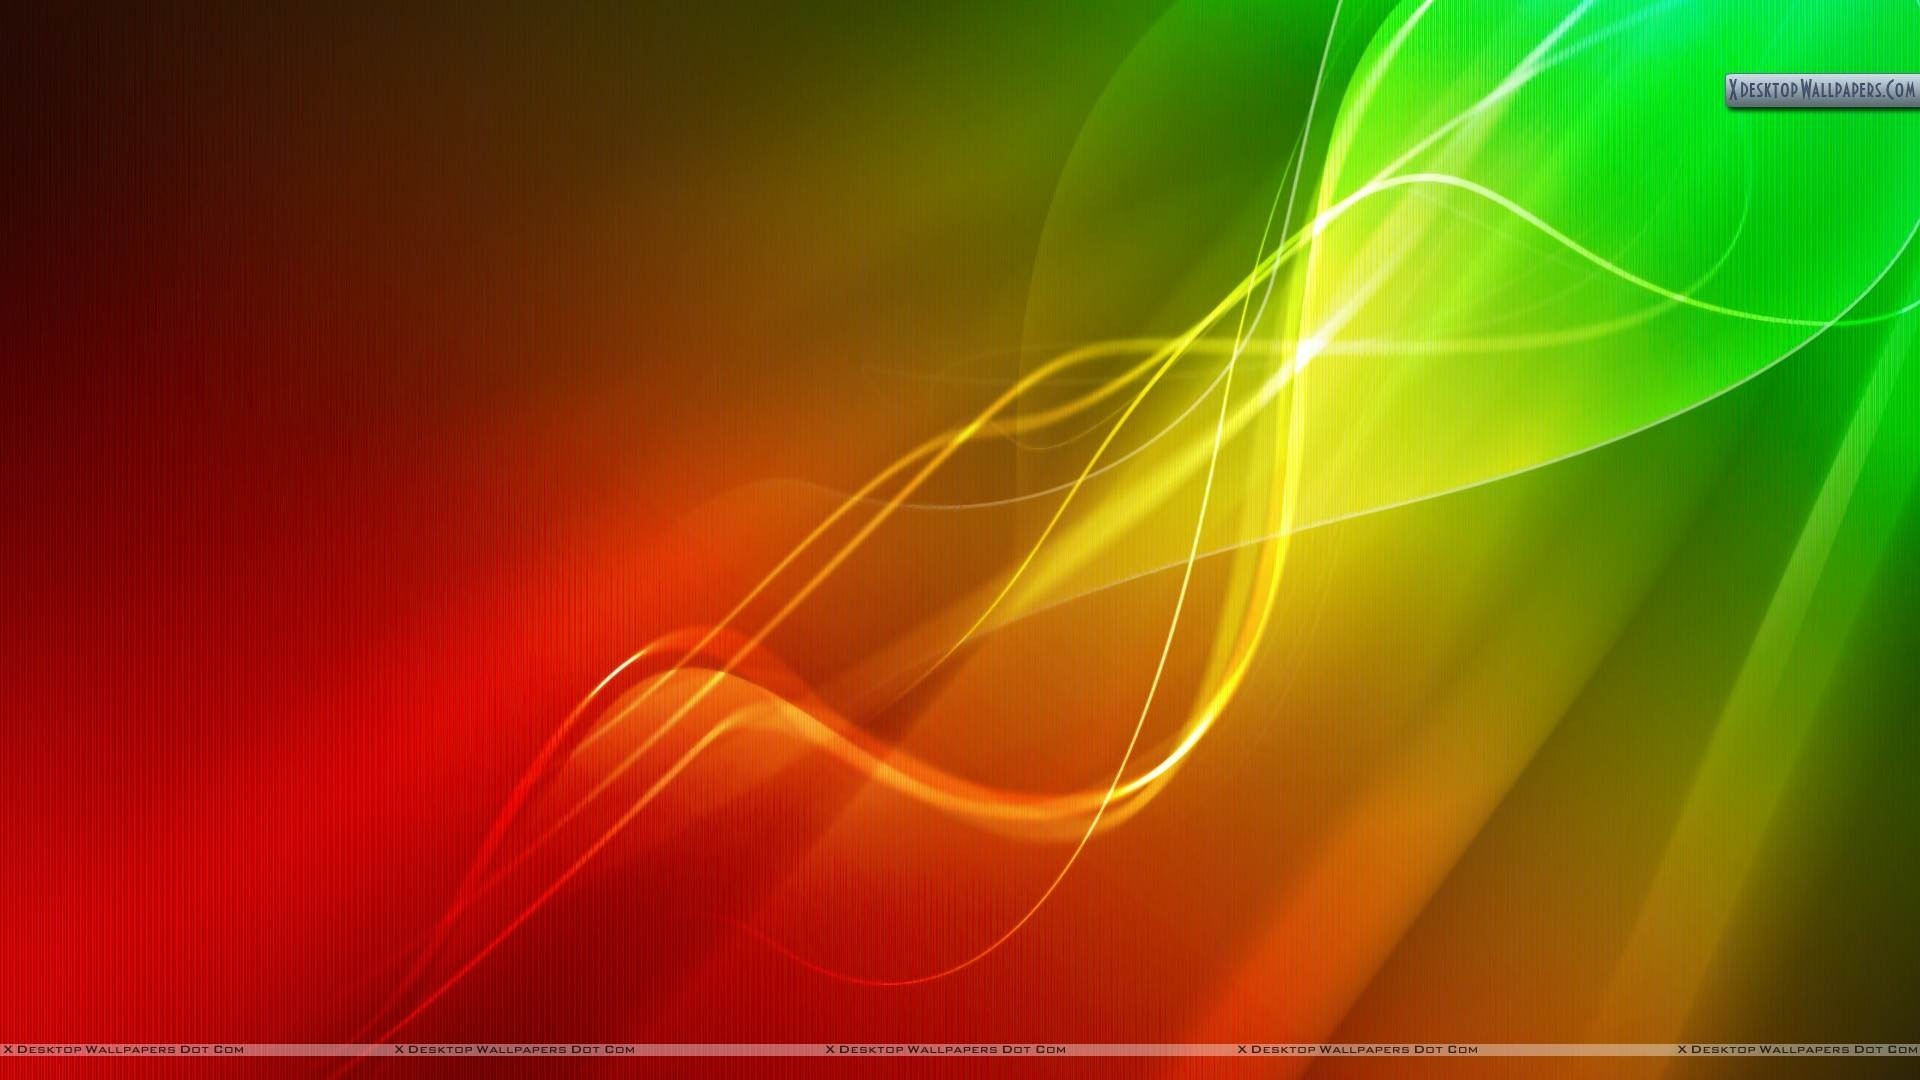 Wallpapers Backgrounds – Black abstract green lights red wallpaper desktop white